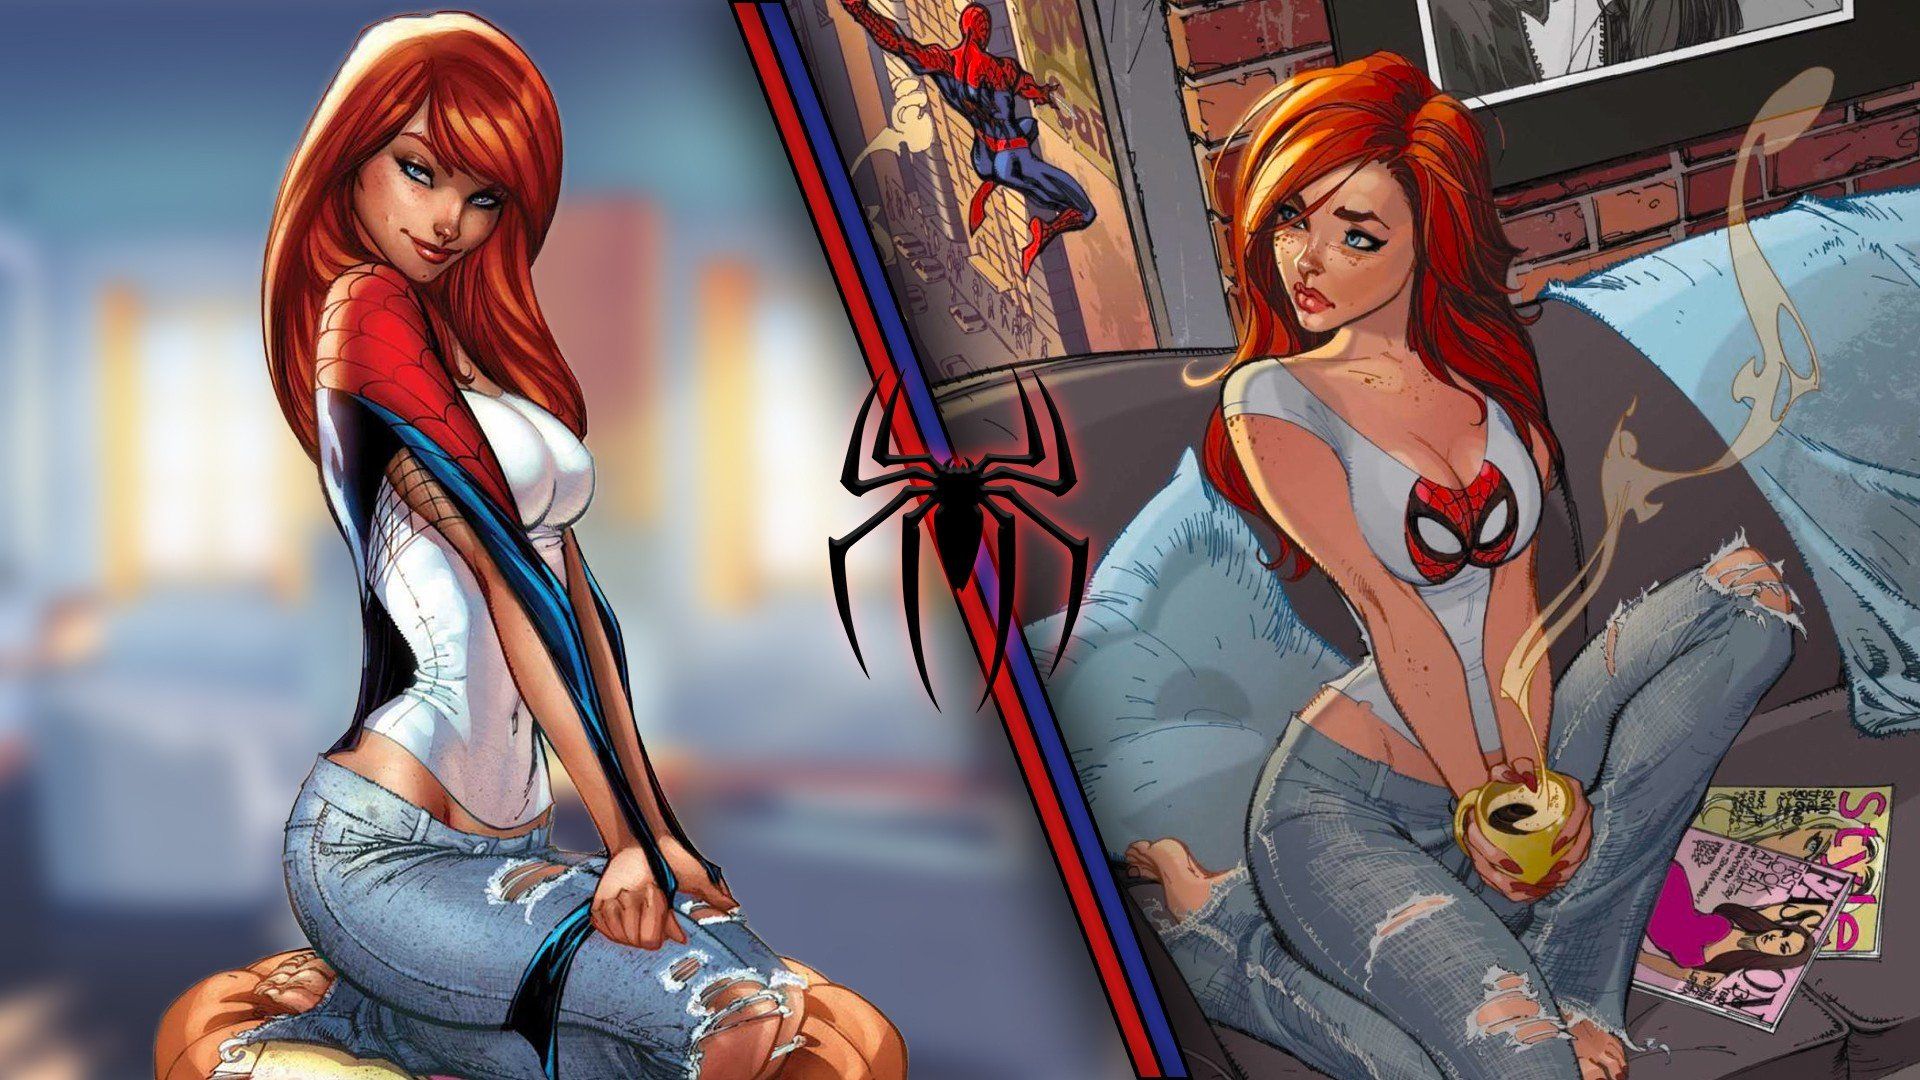 redhead, Mary Jane Watson, Jeans, Spider Man, Marvel Comics, The Amazing Spider Man HD Wallpaper / Desktop and Mobile Image & Photo